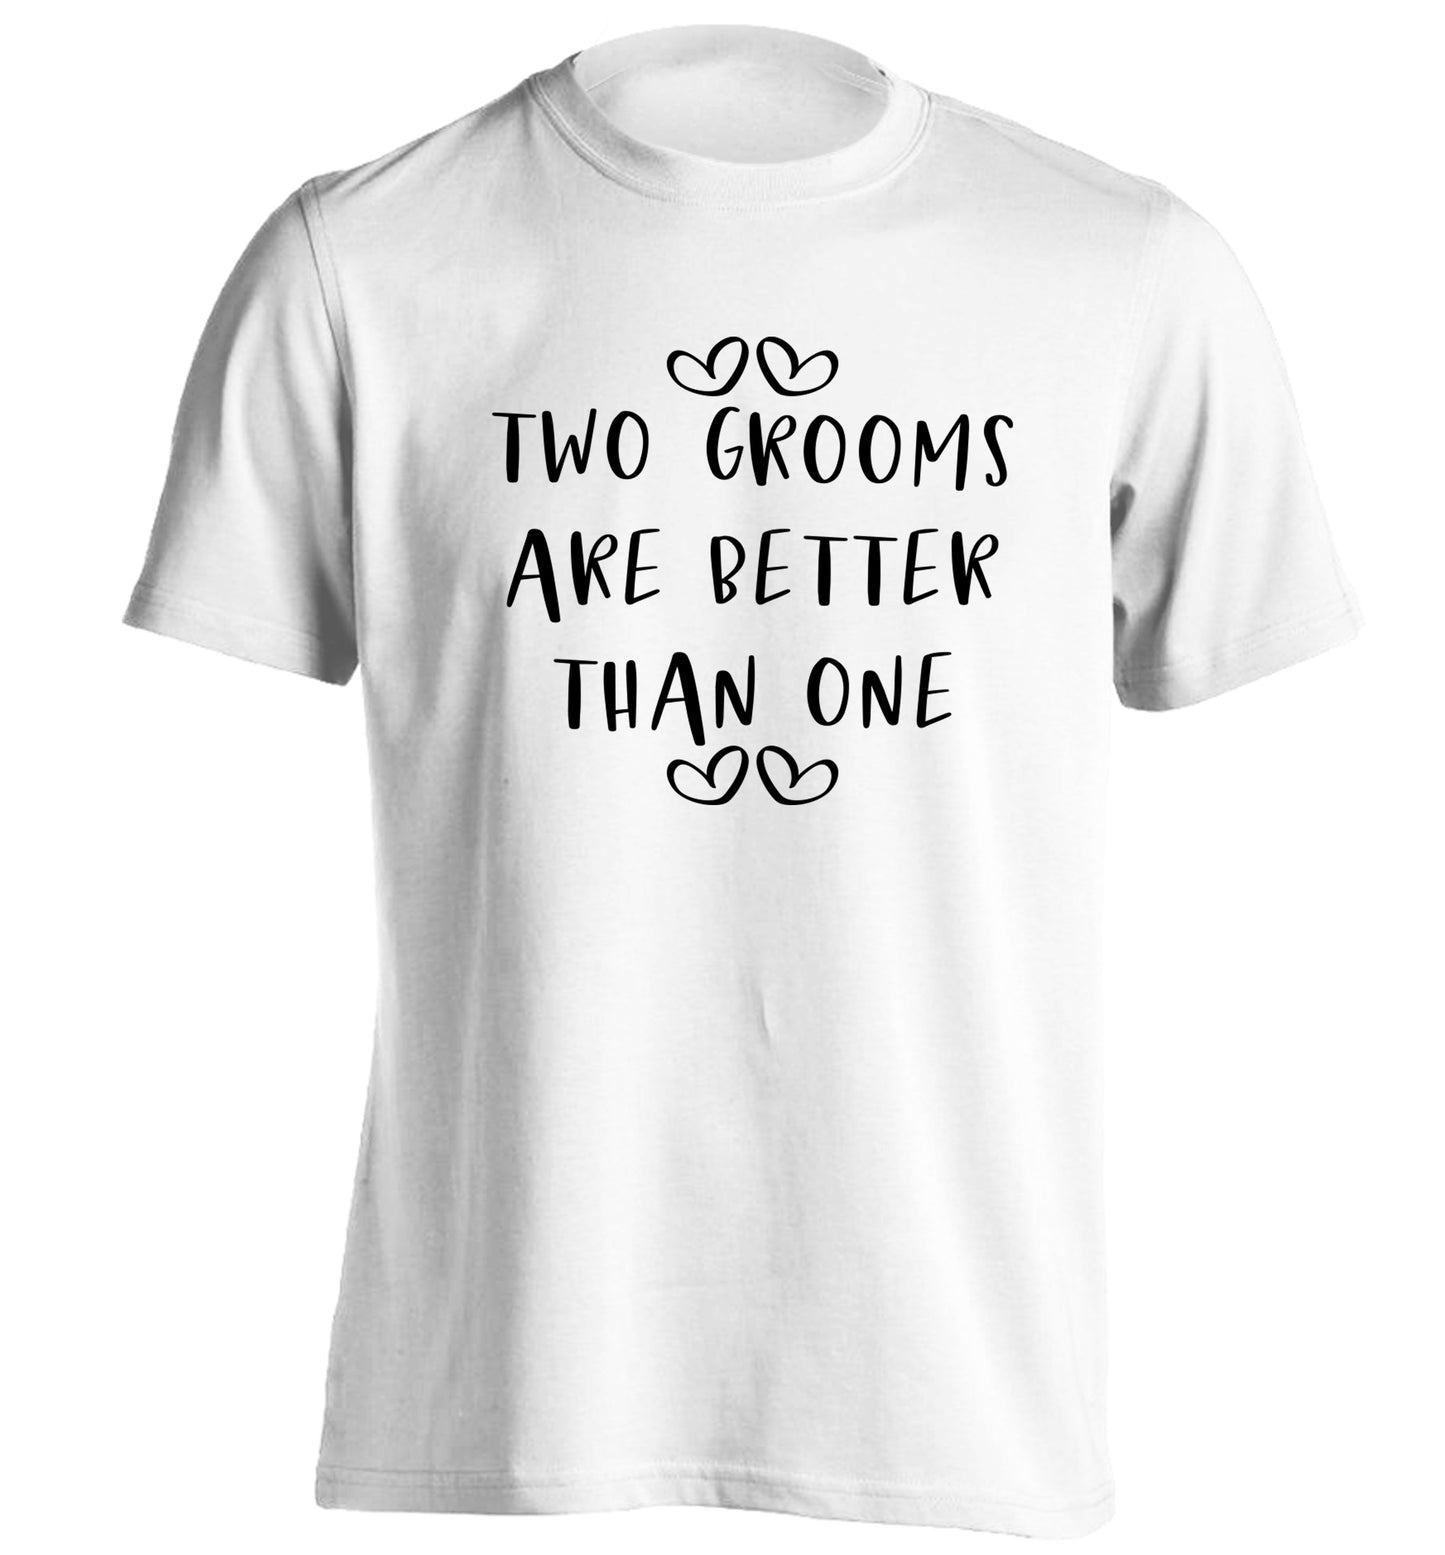 Two grooms are better than one adults unisex white Tshirt 2XL